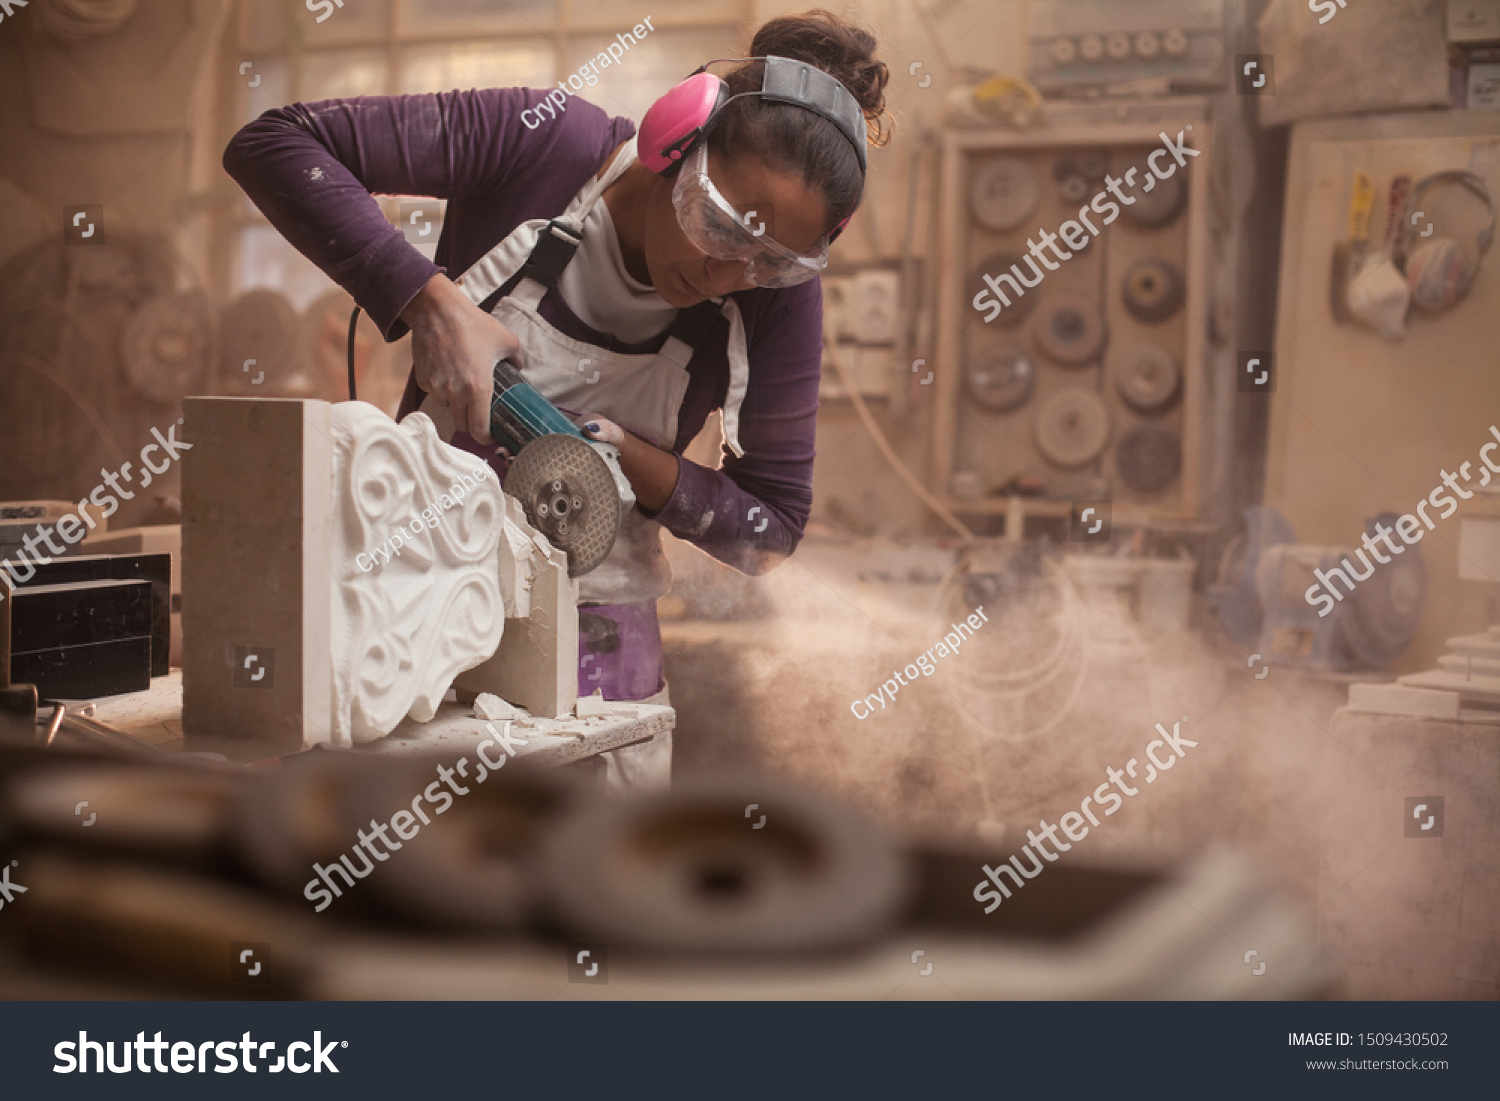 Female stonemason cutting a piece of white marble in a workshop, craftswoman grinding a sculpture with angle grinder, dust and debris flying, women doing hard work concept, stonemasonry and stonecraft #1509430502